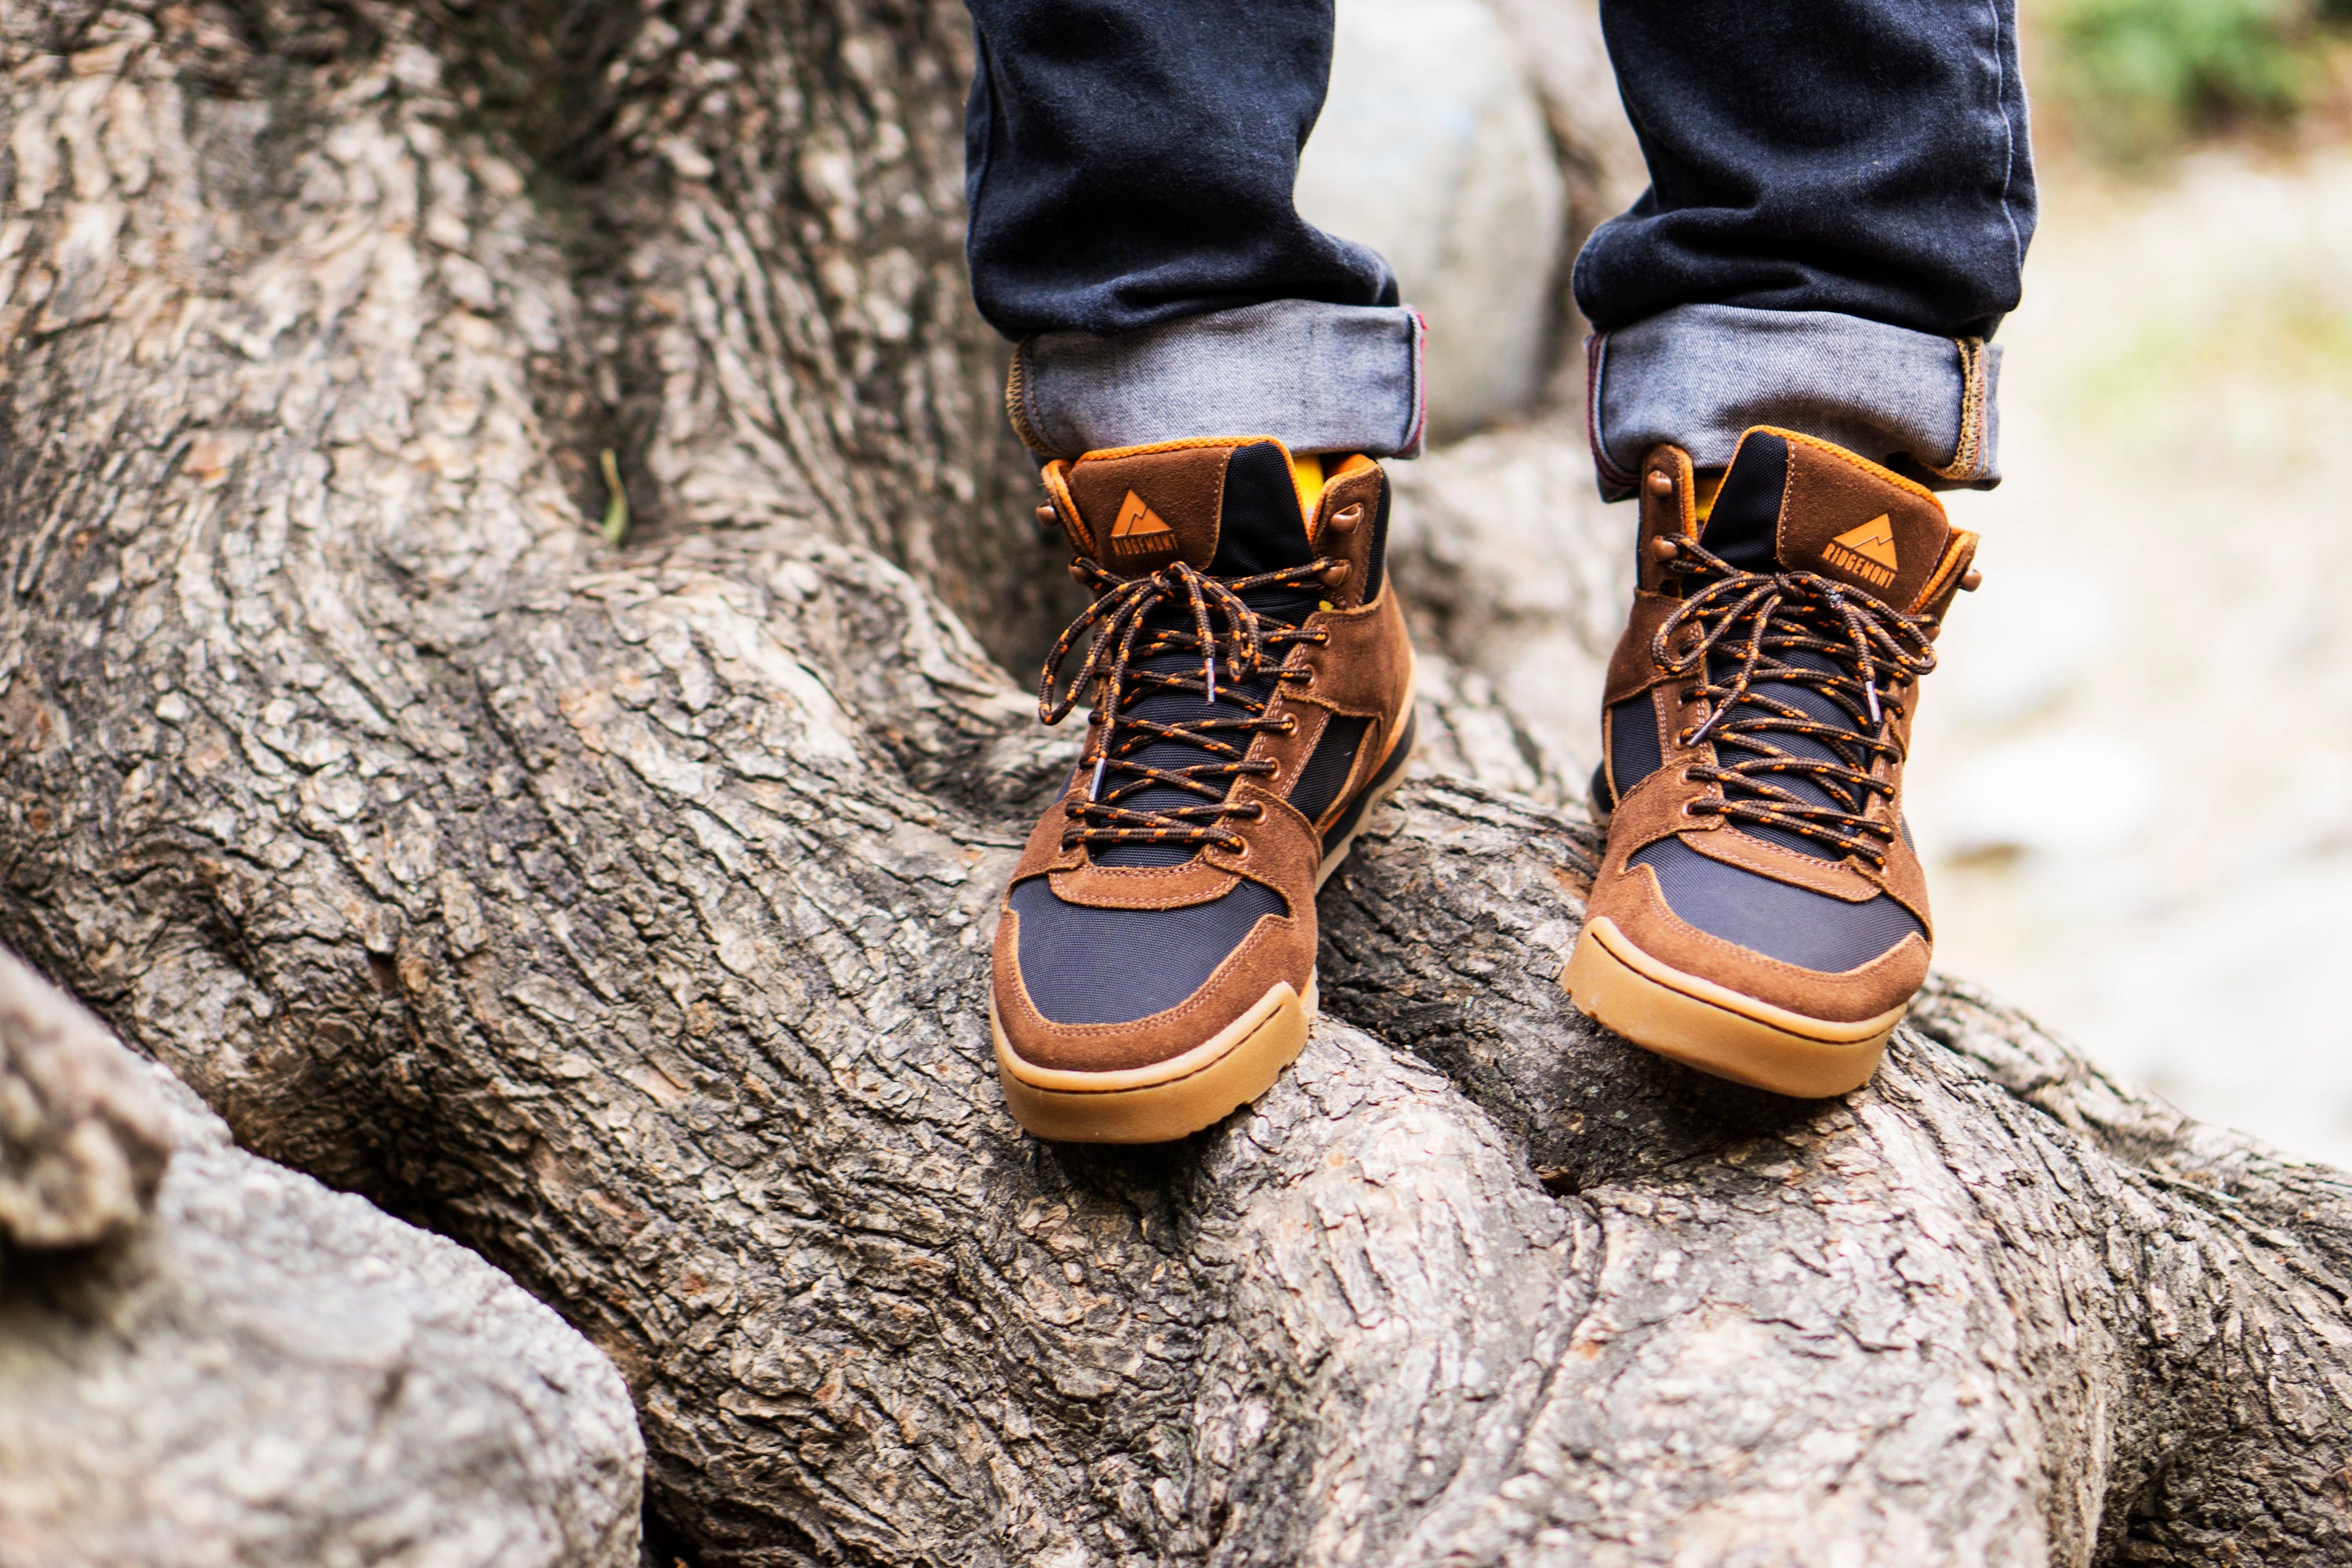 Best Stylish Hiking Boots in 2021 for Men and Women